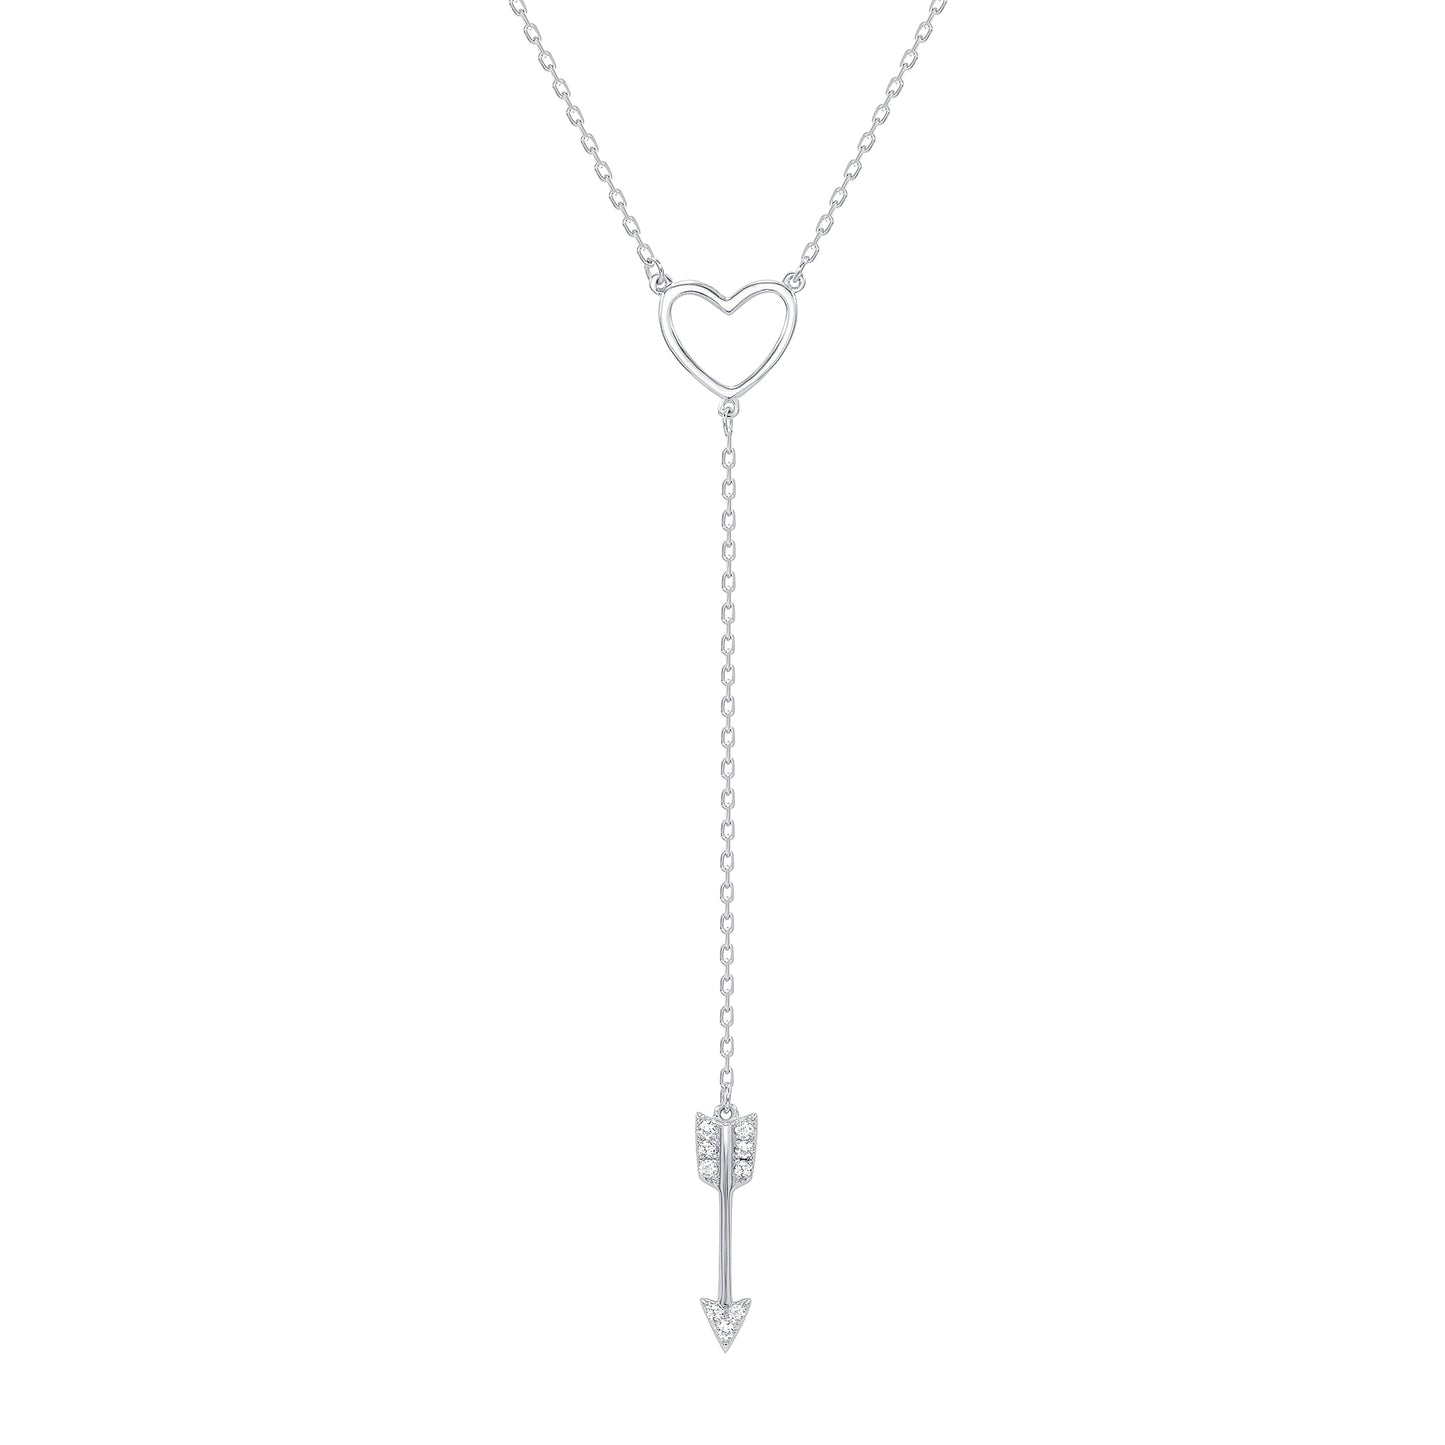 BN3444RHD. Silver 925 Rhodium Plated Heart and Cubic Zirconia Arrow Necklace